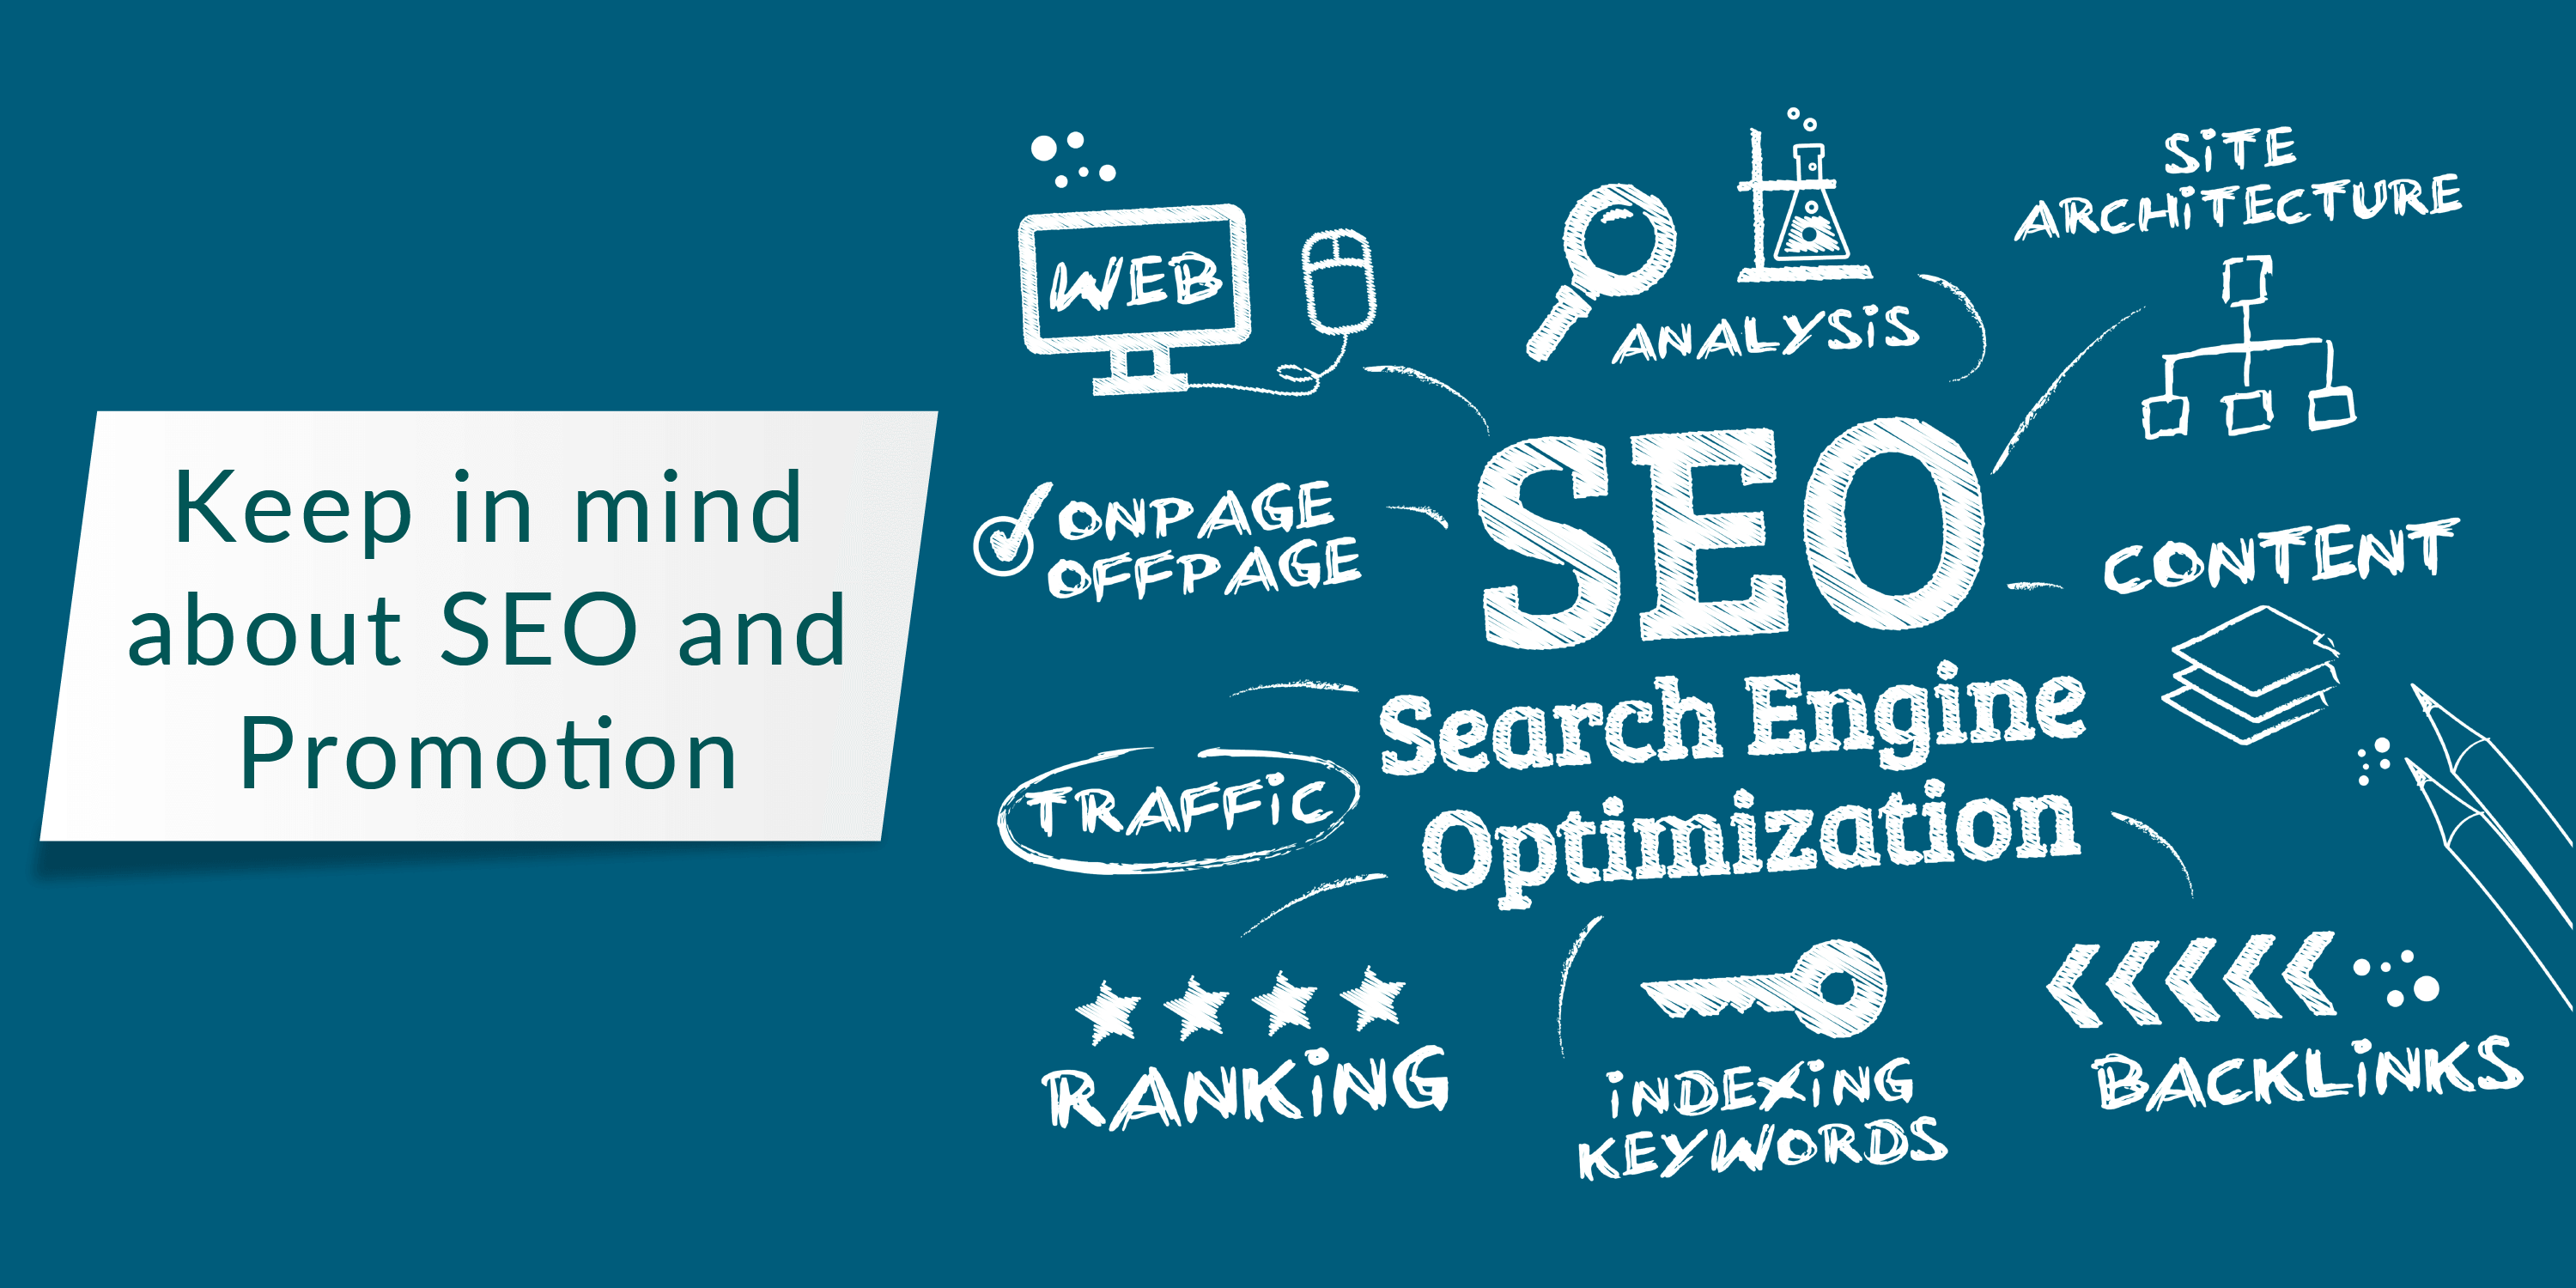 KEEP IN MIND ABOUT SEO AND PROMOTION